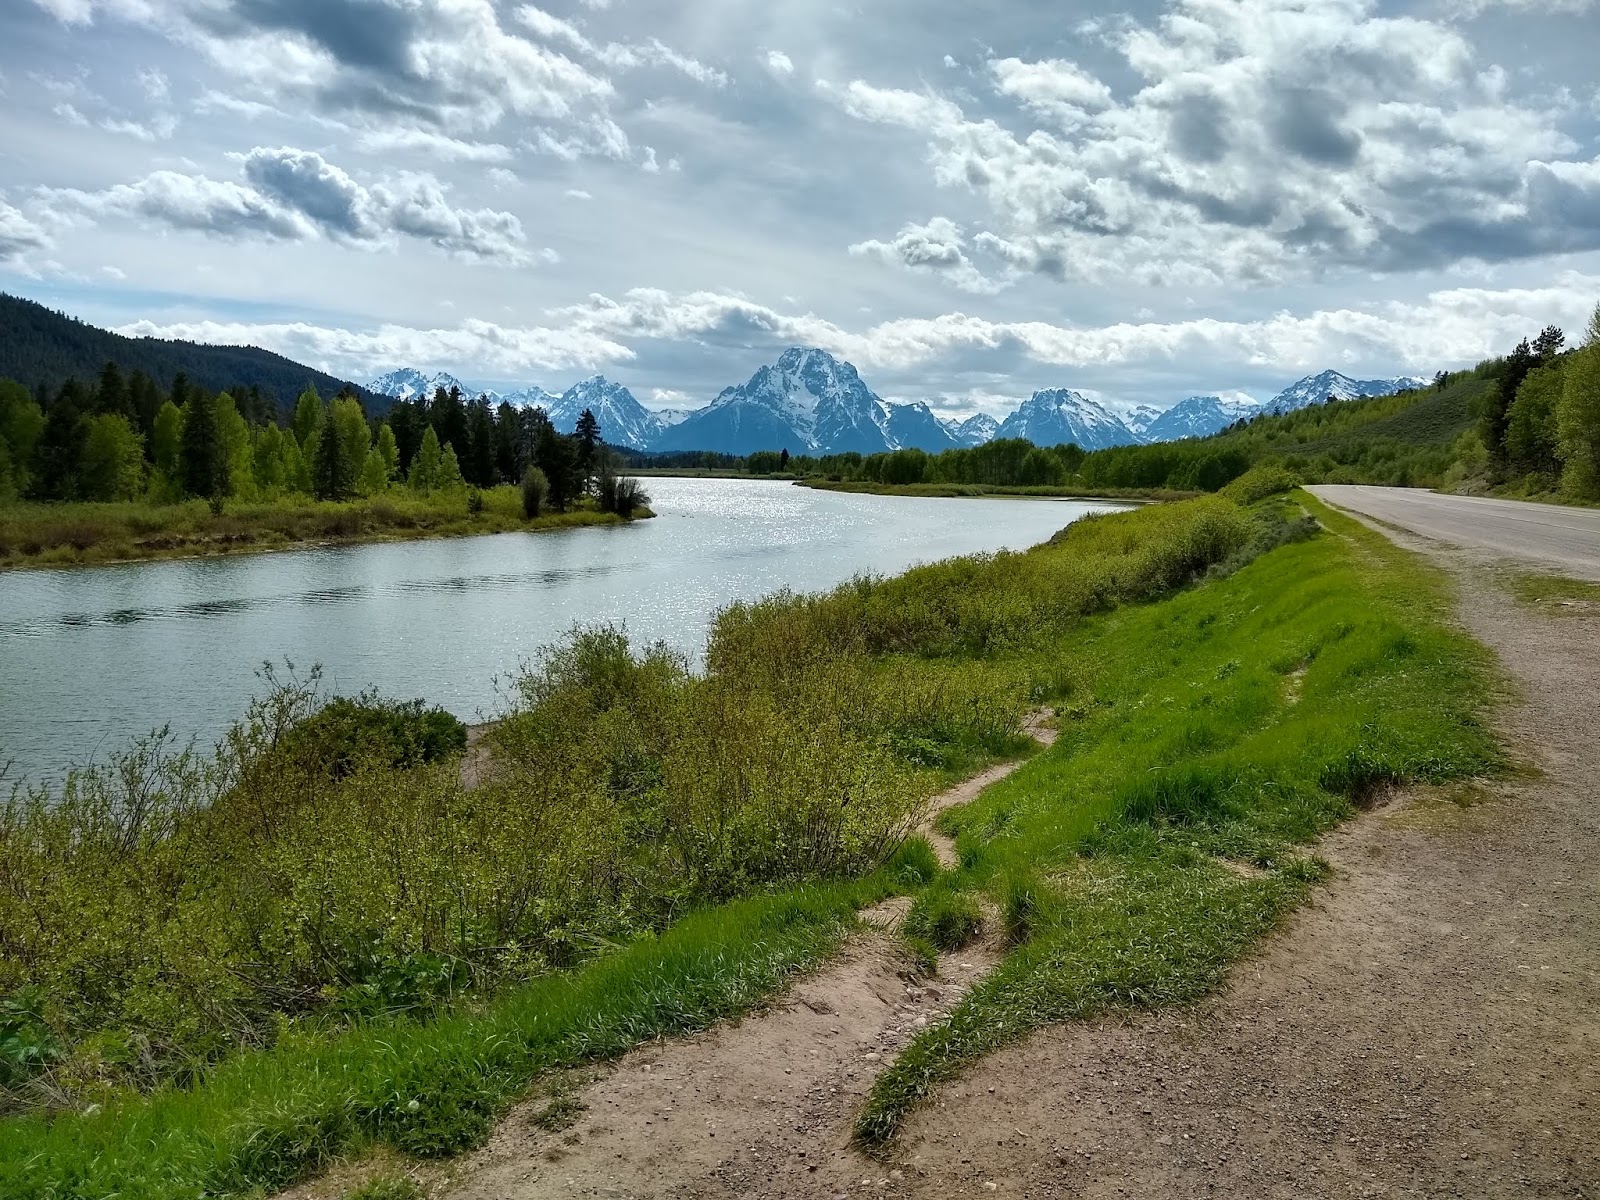 keepers-of-the-scenic-way-albert-travel-log-2019june-yellowstone-part-1